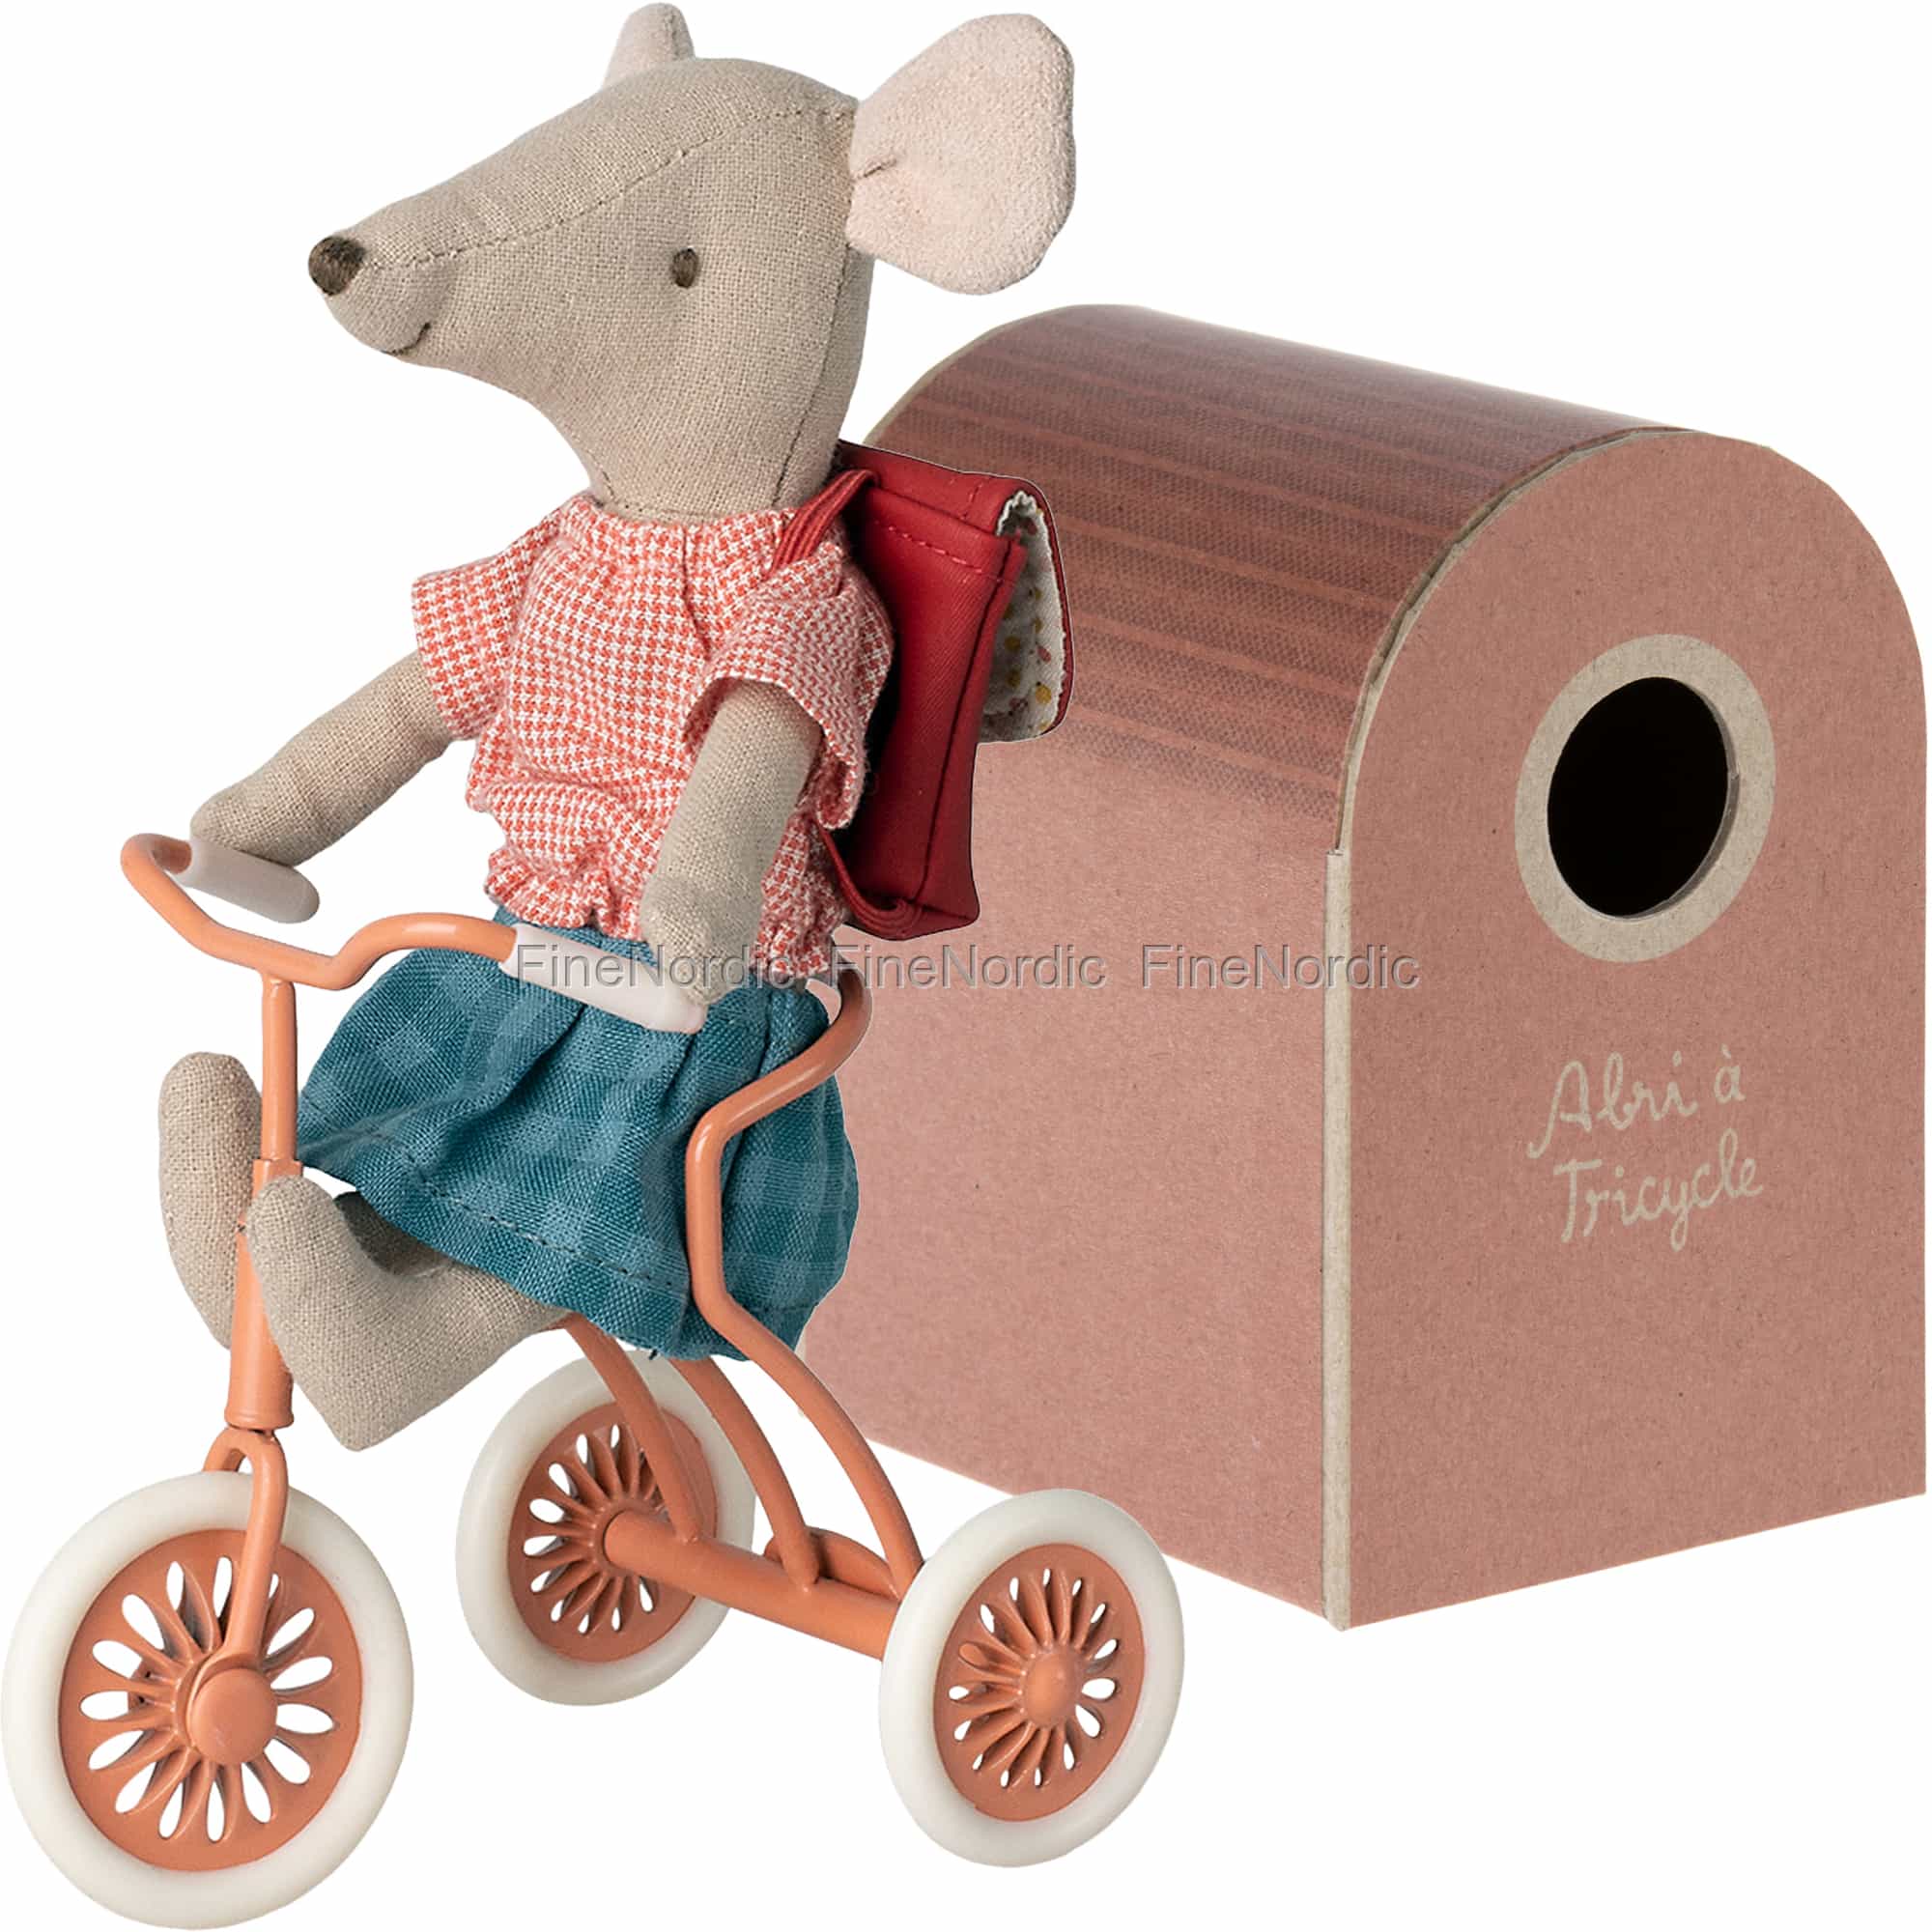 Maileg Tricycle for Mouse with Abri à Tricycle - Coral (without mouse)